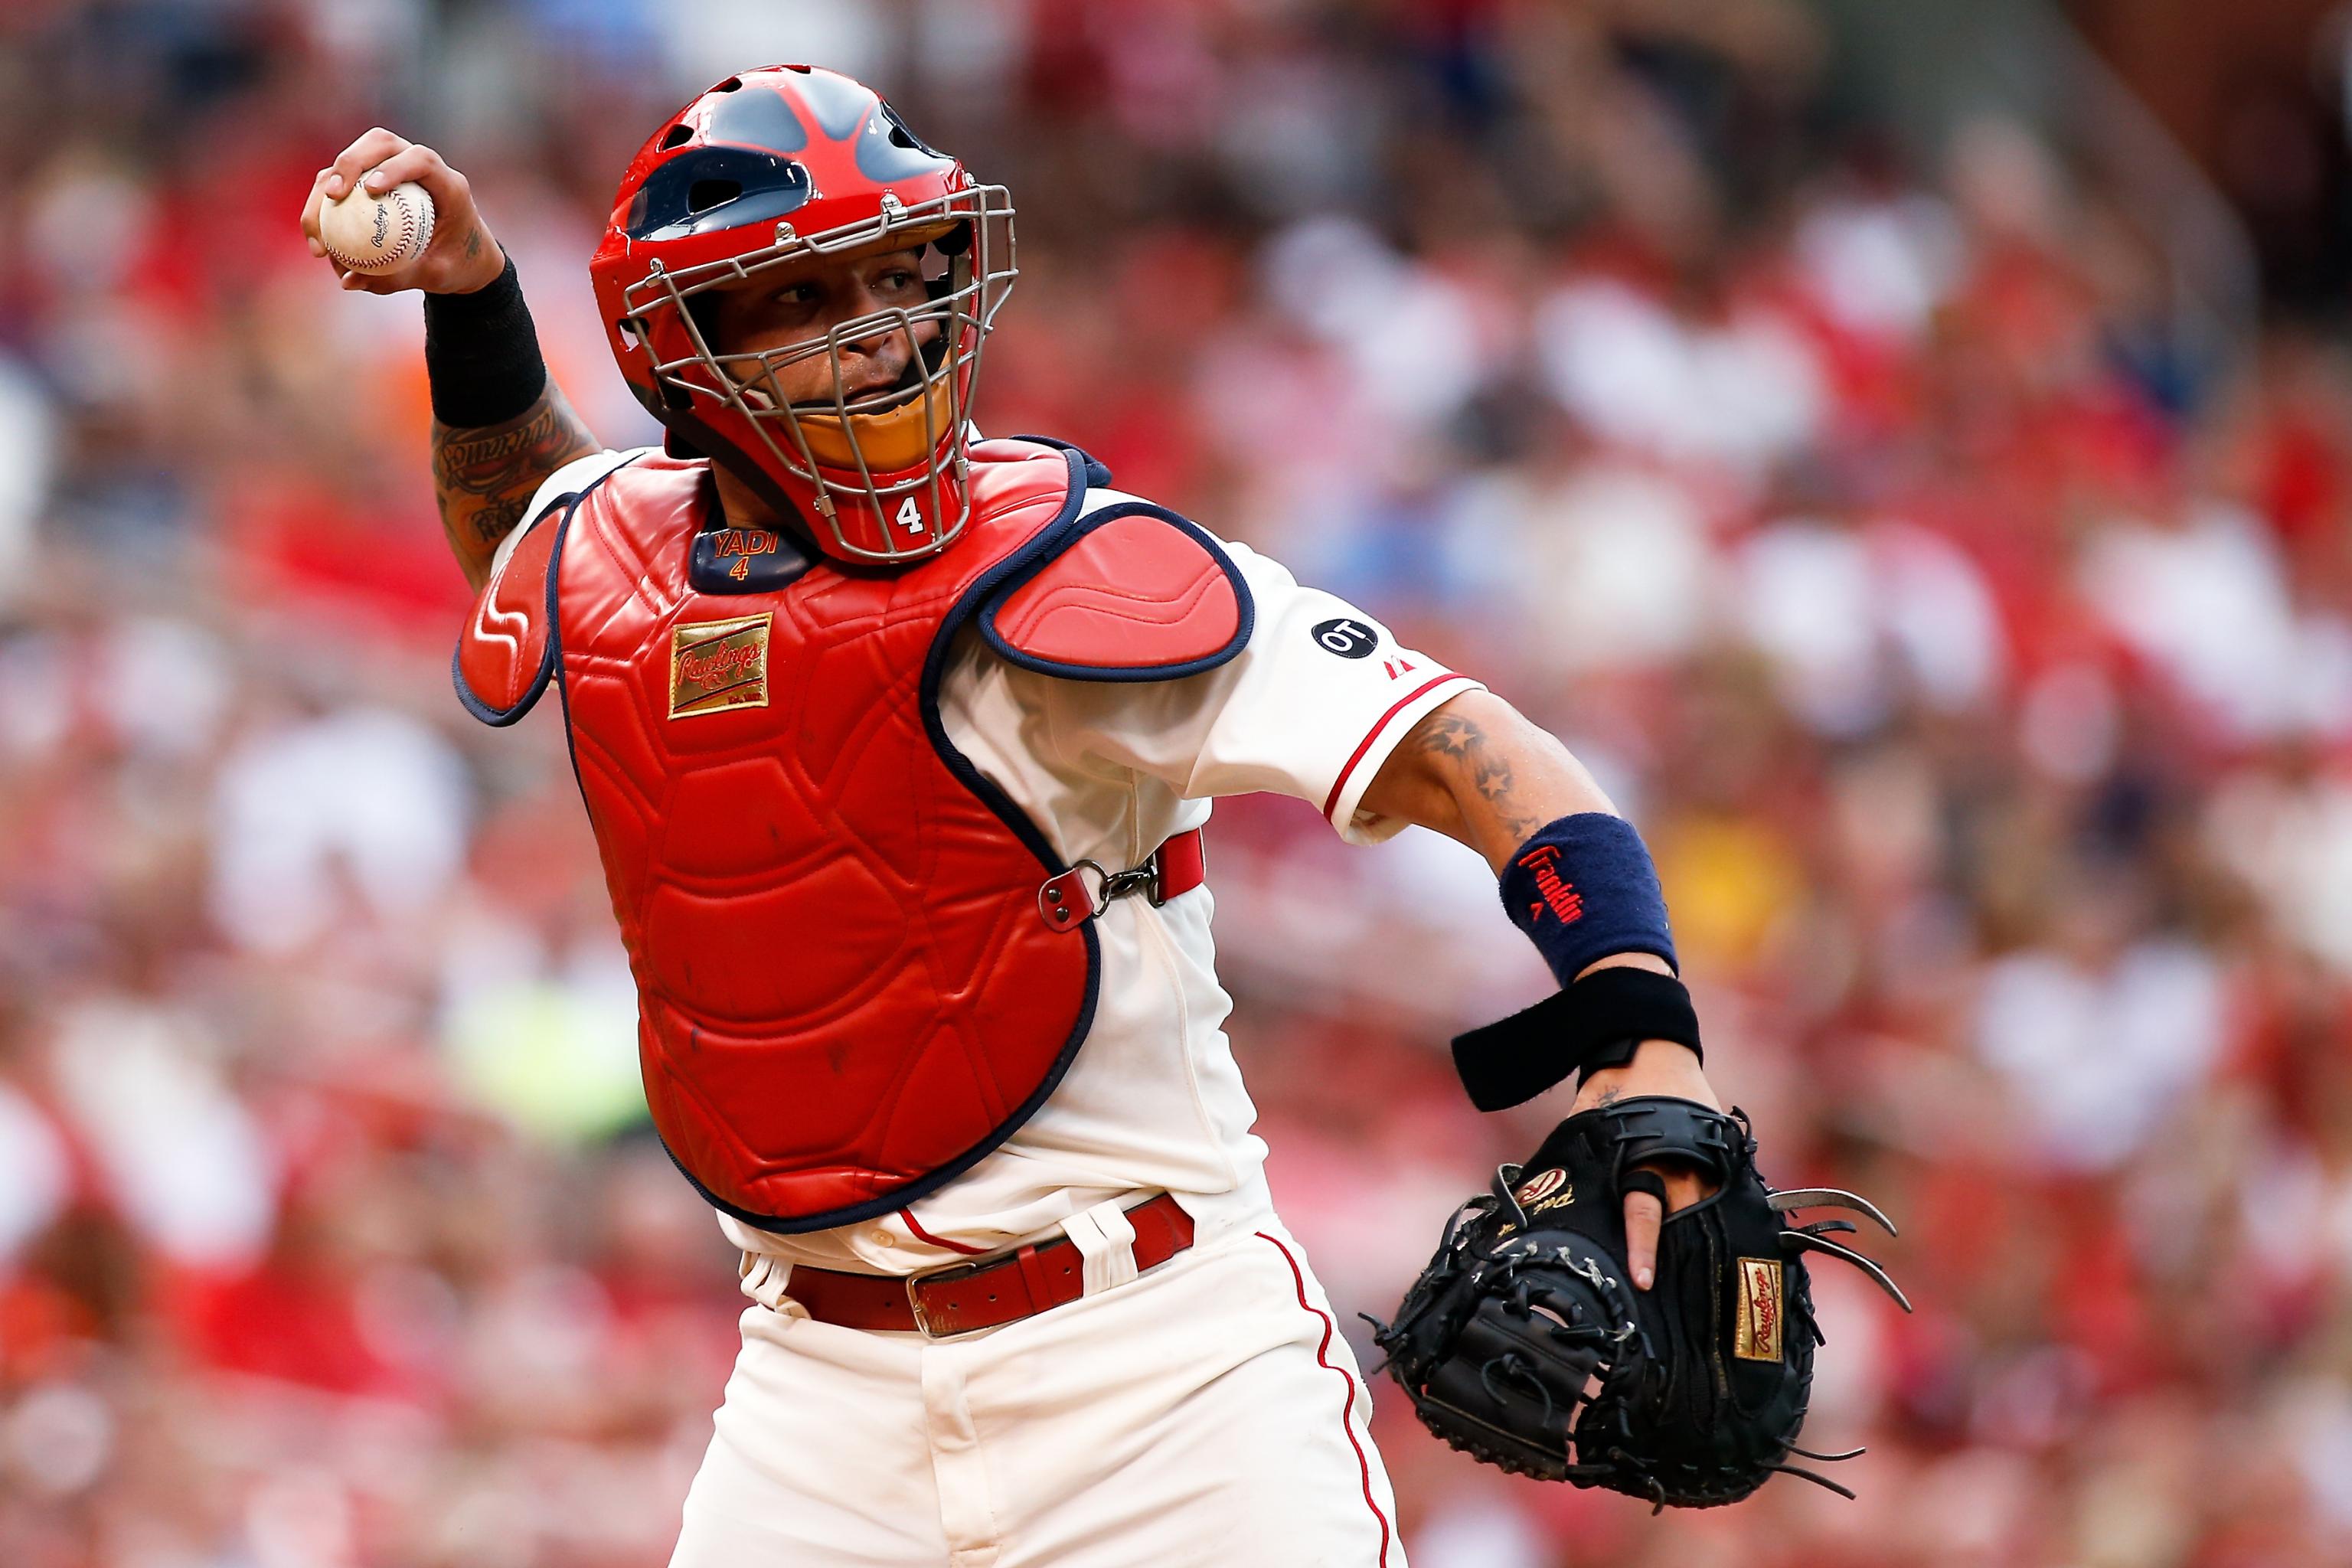 Yadier Molina out 2-3 months with thumb injury 